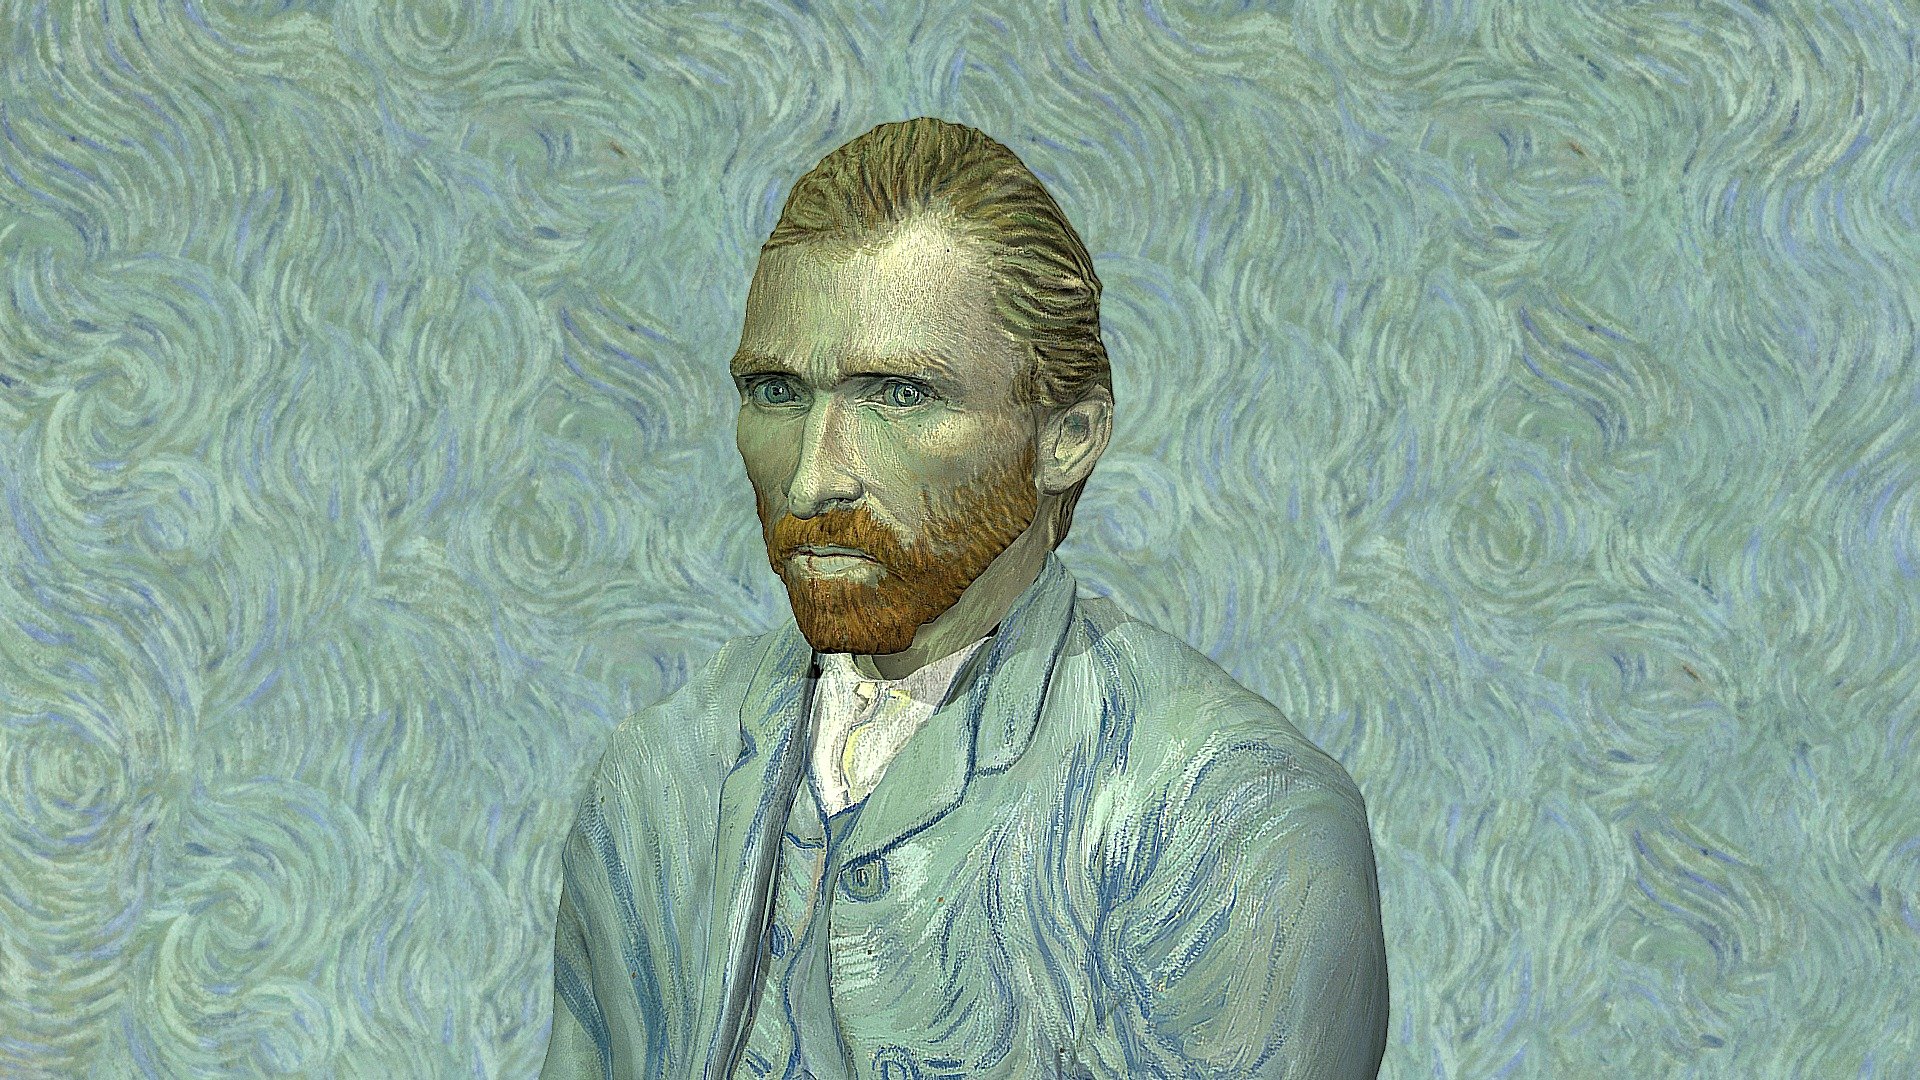 Personal project, learning new techniques.
Modeling in ZBrush, retopology in Maya, textures hand painted in Photoshop and Substance Painter .

https://www.artstation.com/artwork/bdzVa - Van Gogh self-portrait (1889) - Buy Royalty Free 3D model by viktorcemboran 3d model